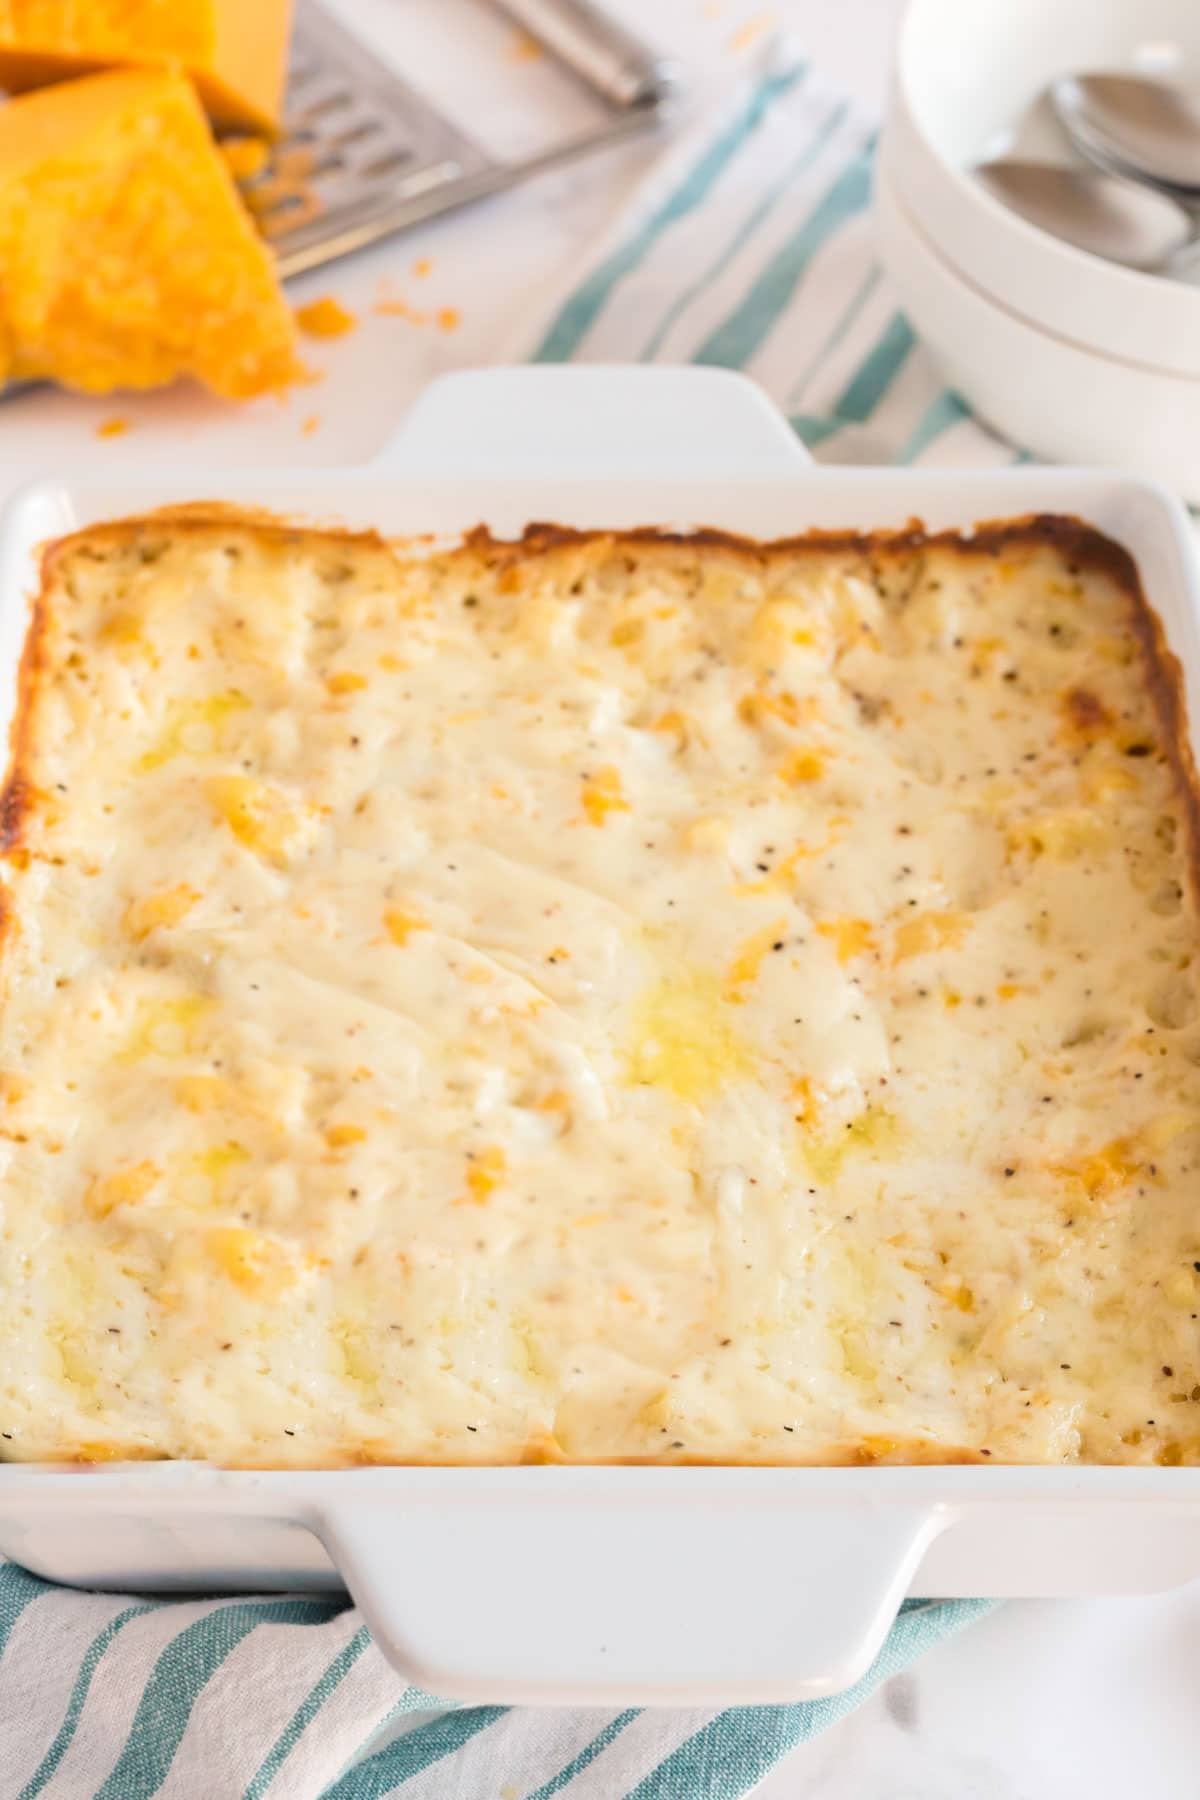 Baked macaroni and cheese with bechamel sauce on top